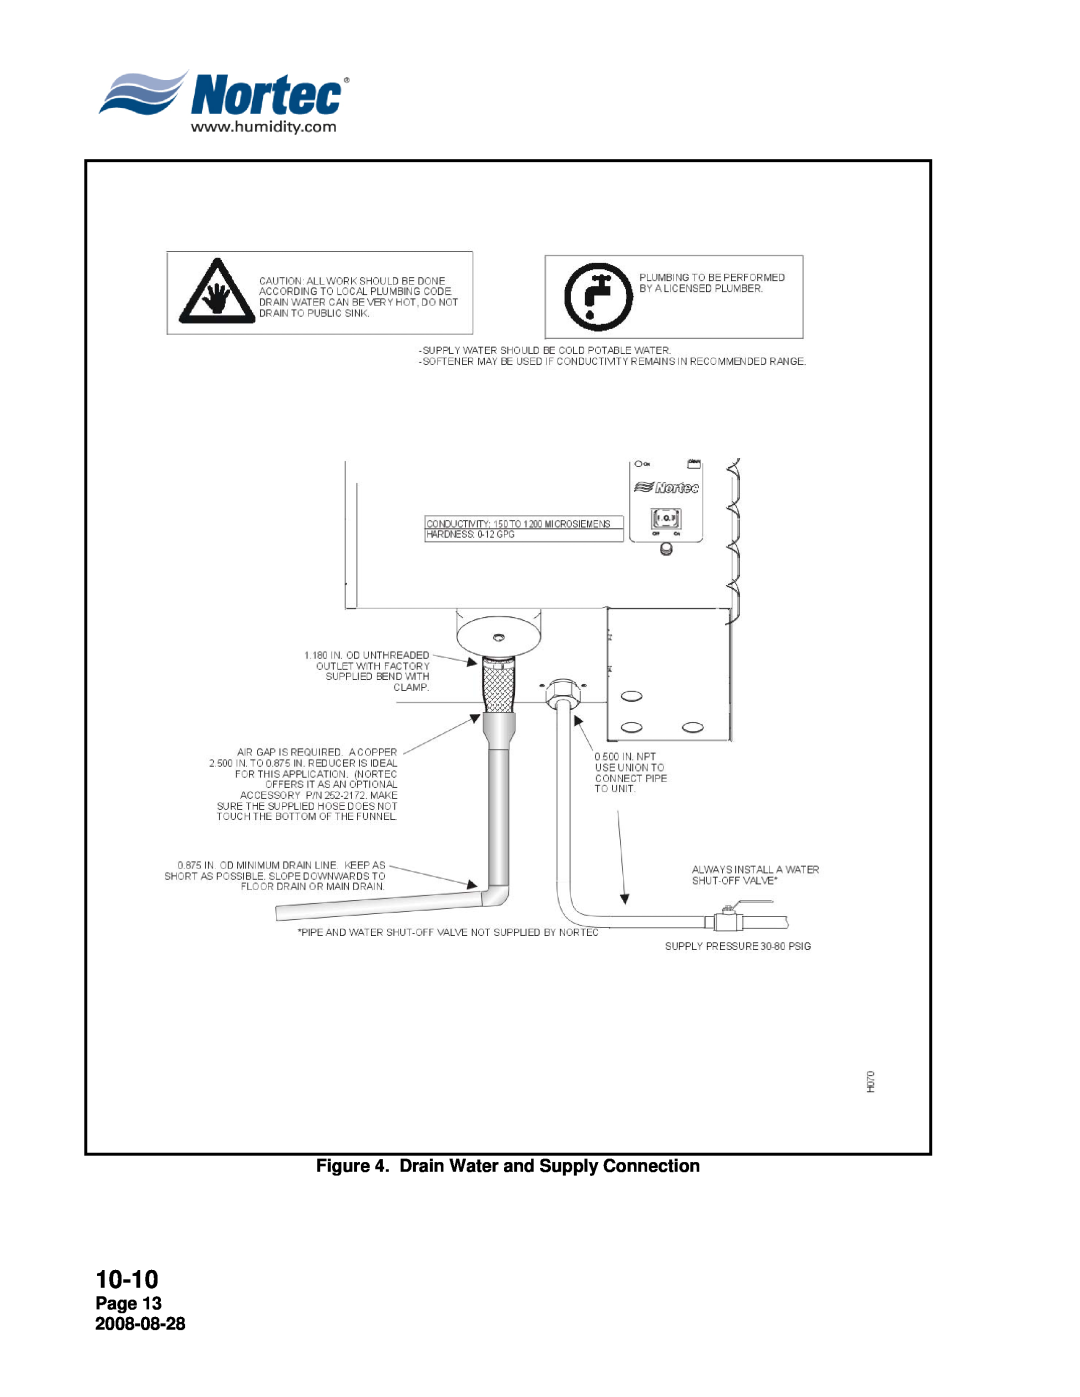 Nortec NH Series installation manual 10-10, Drain Water and Supply Connection, Page 13 